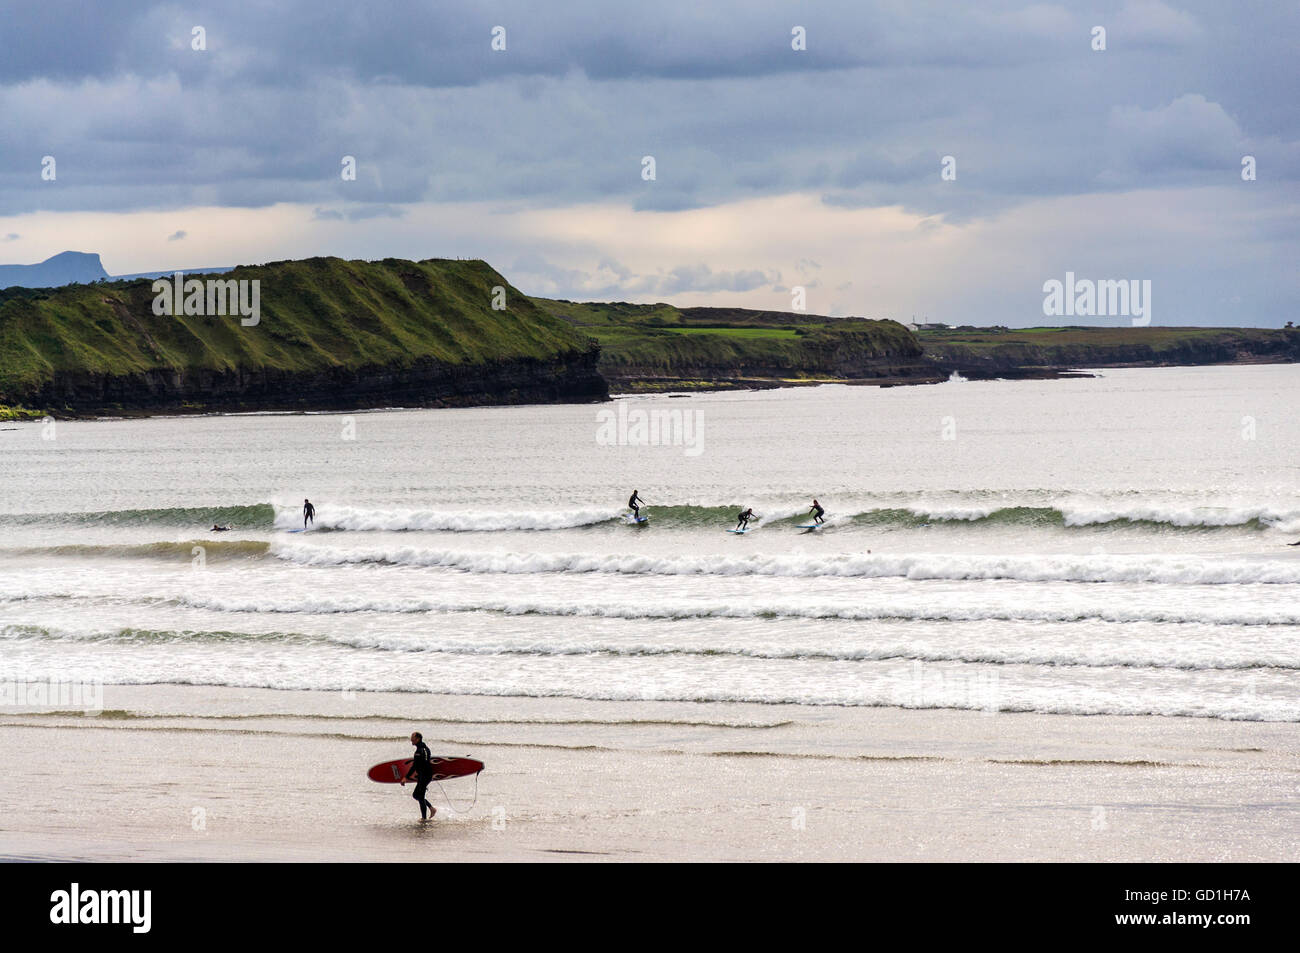 Surfing waves at Rossnowlagh beach, Donegal Bay, County Donegal, Ireland Stock Photo